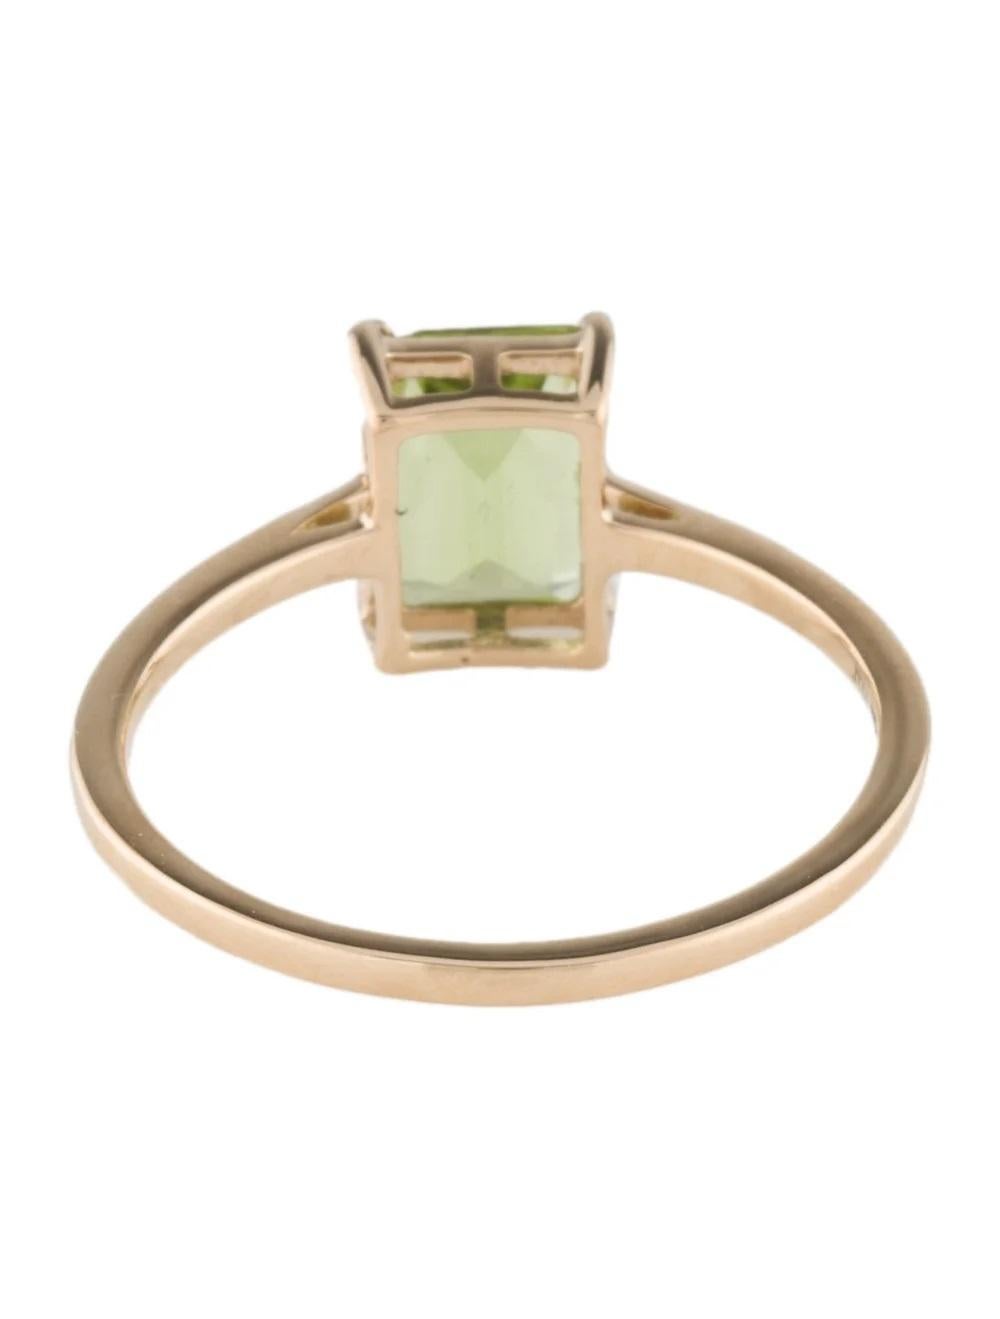 14K 1.50ct Peridot Cocktail Ring, Size 6.75 - Green Gemstone, Elegant Design In New Condition For Sale In Holtsville, NY